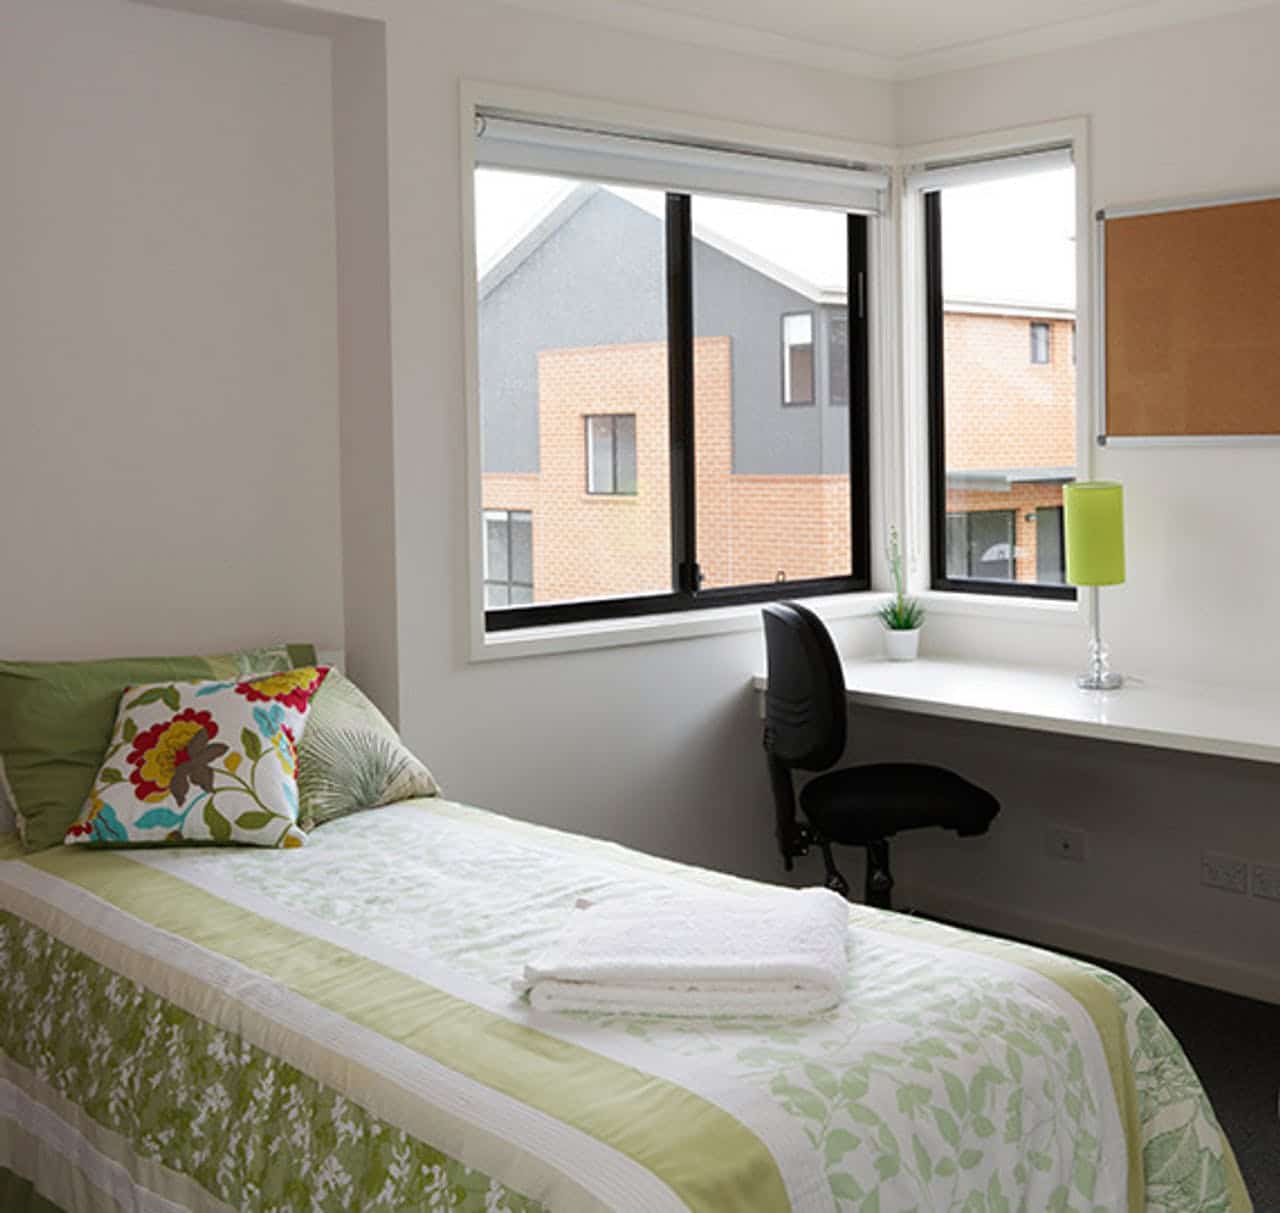 Best Student Accommodation Near the University of New South Wales (UNSW) 